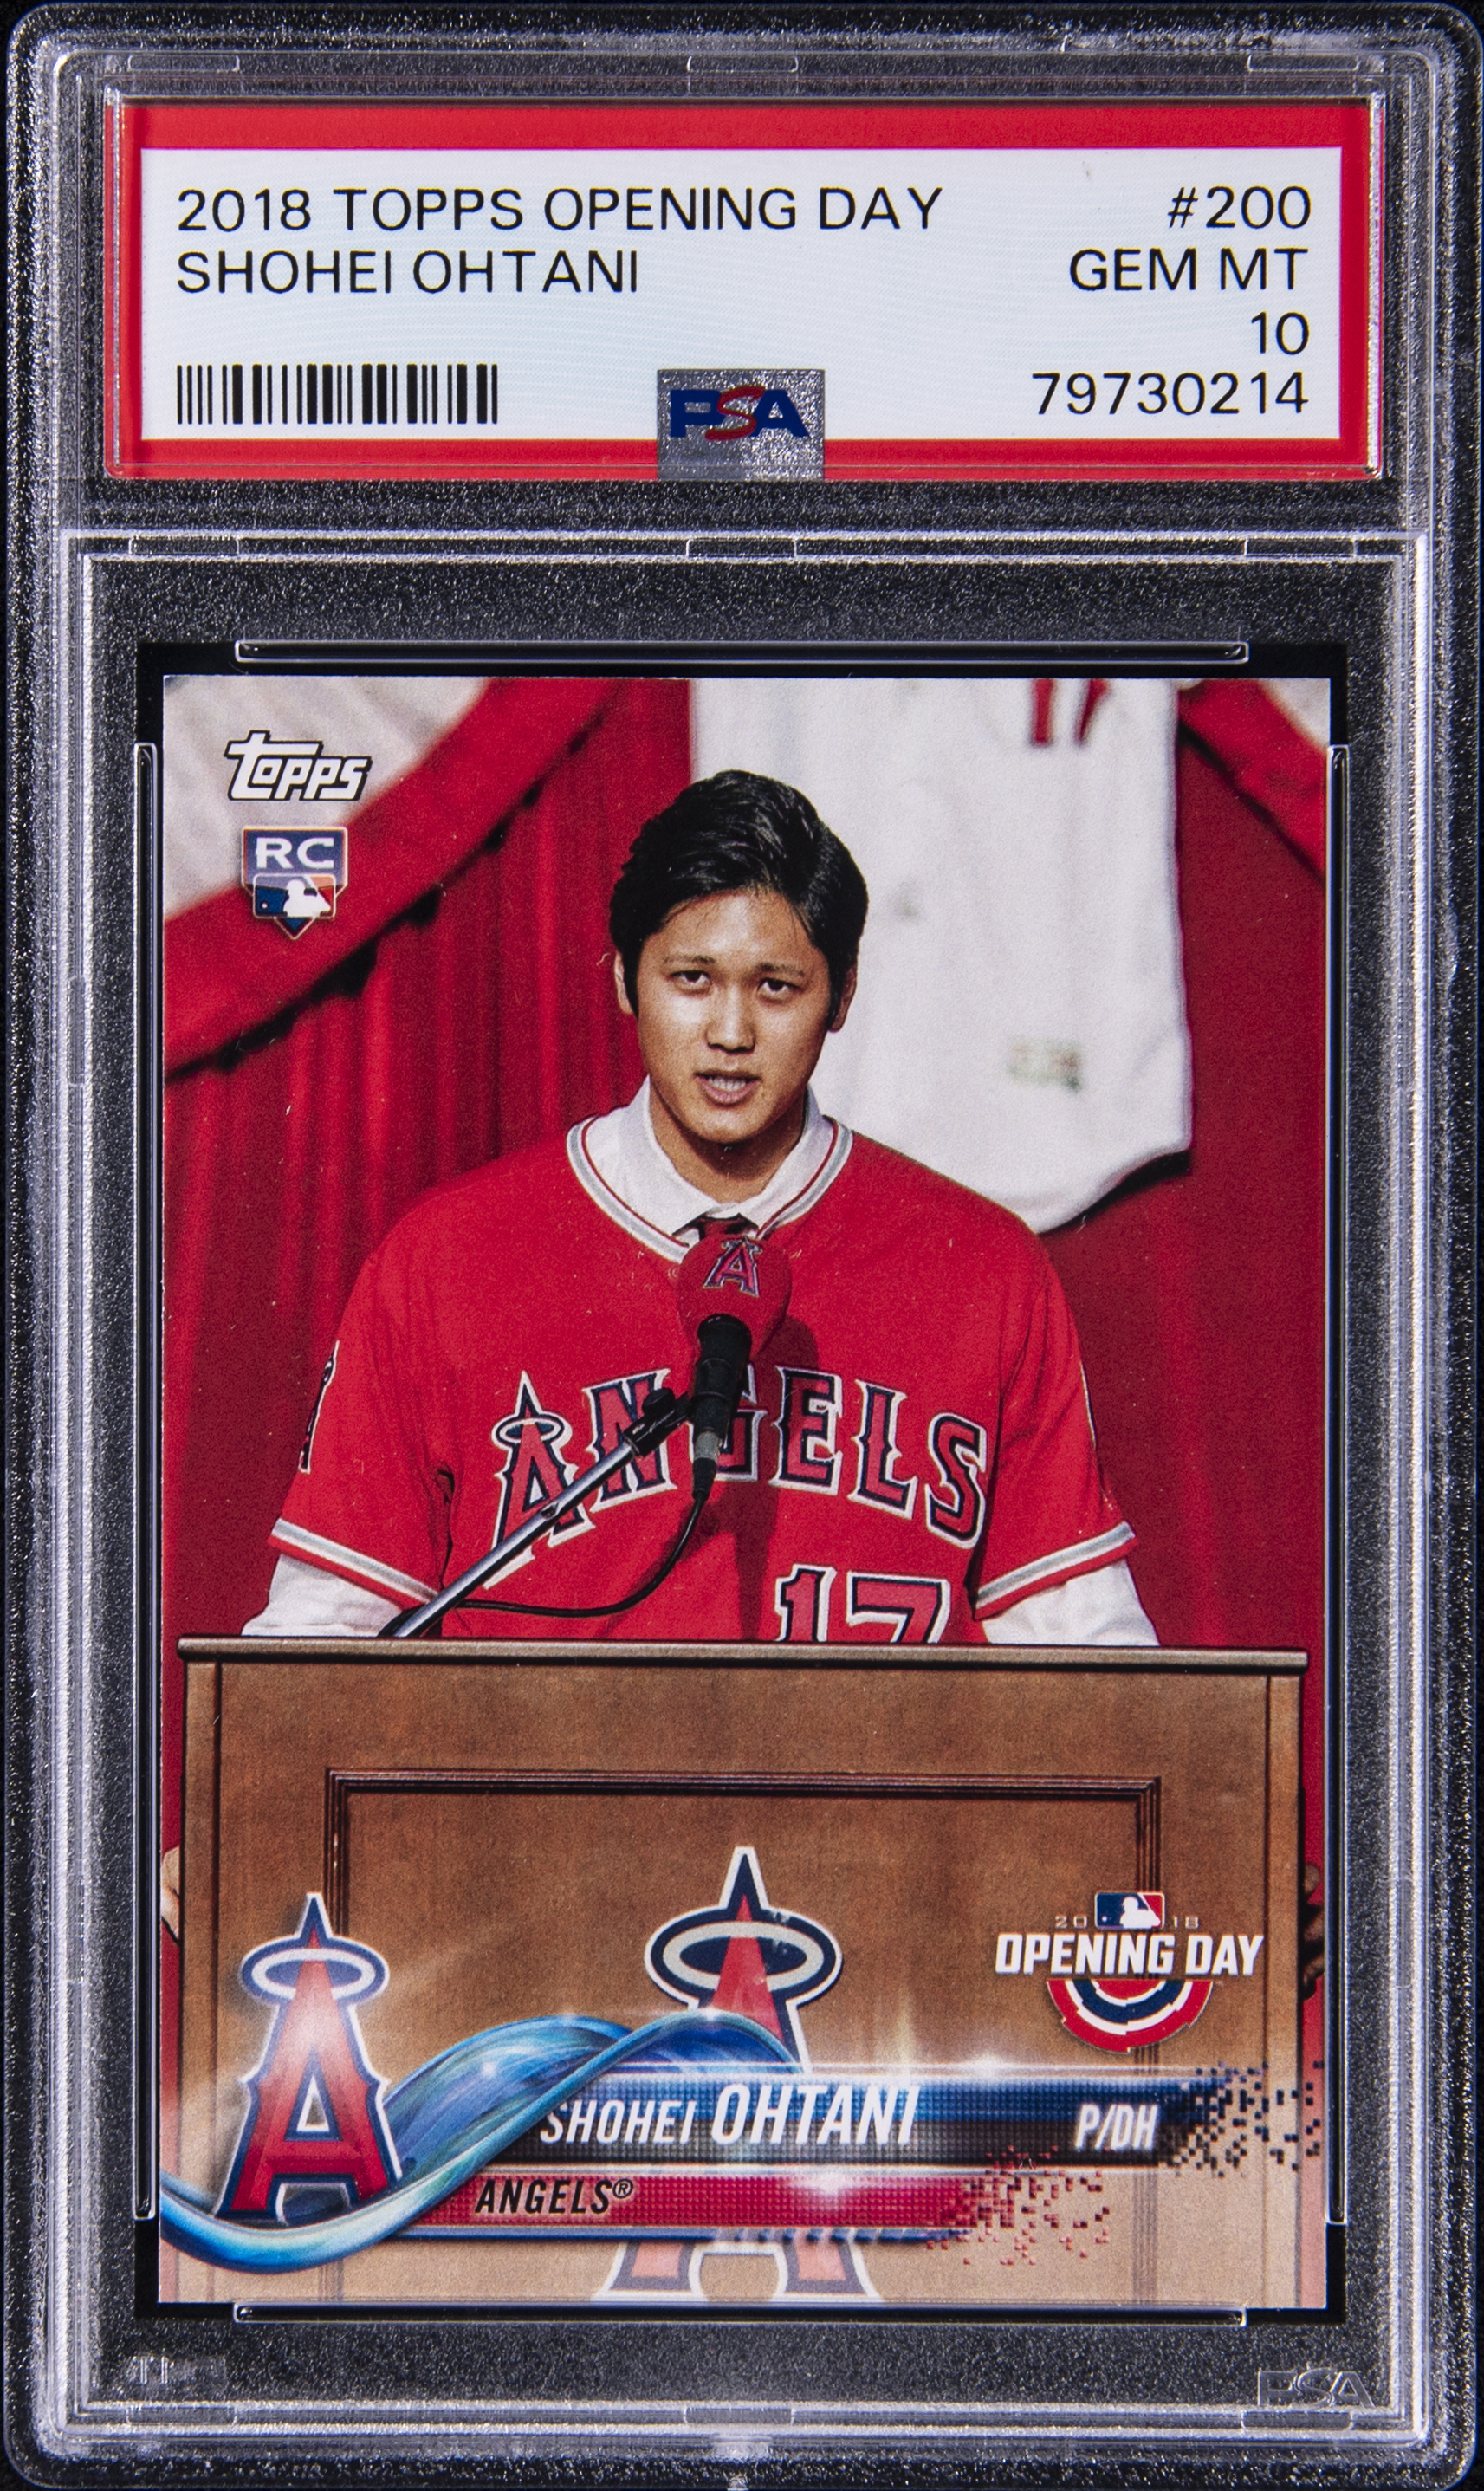 2018 Topps Opening Day #200 Shohei Ohtani Rookie Card  – PSA GEM MT 10